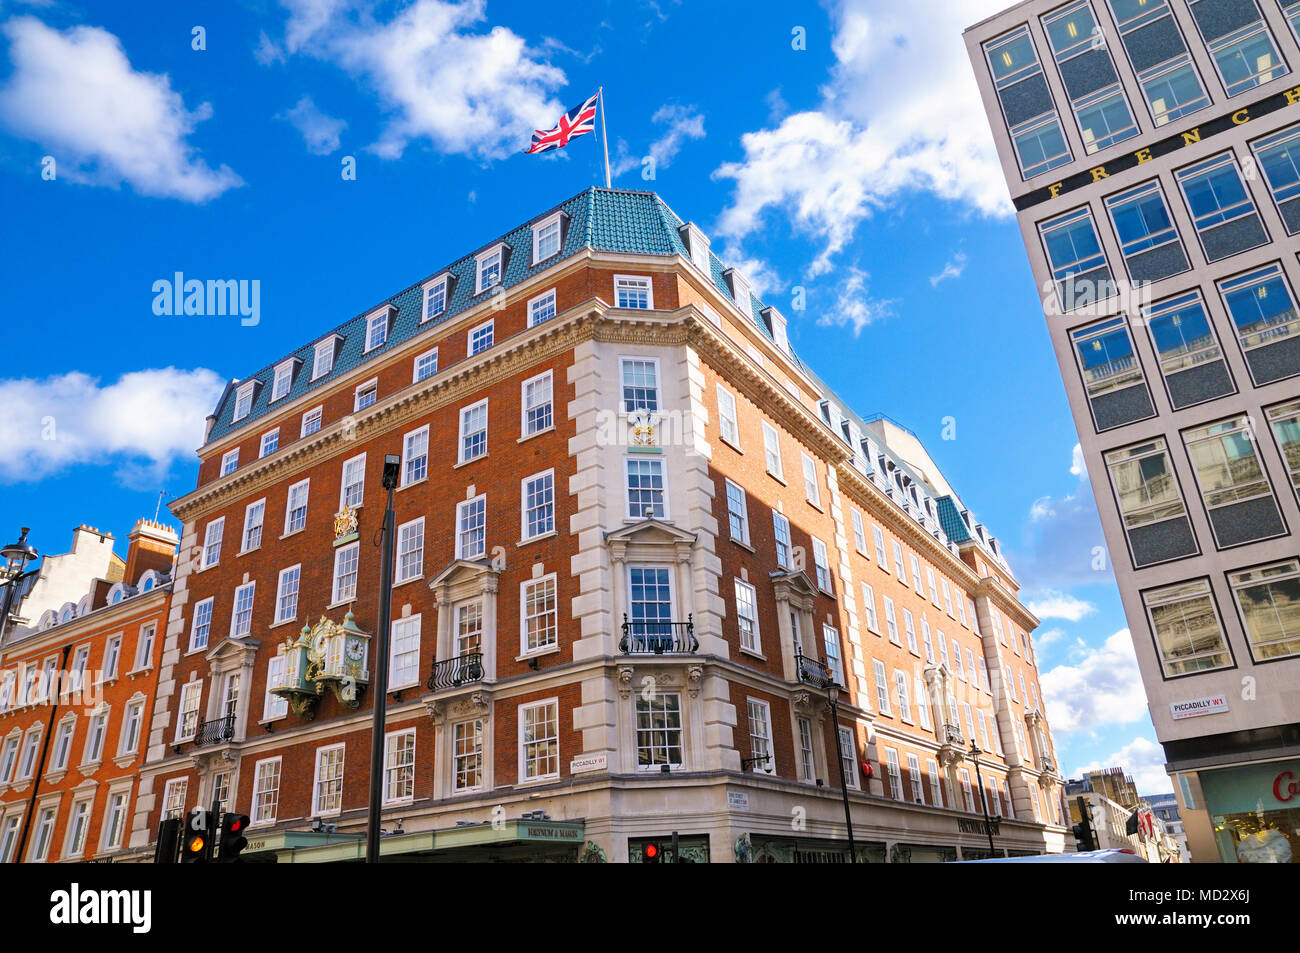 Fortnum & Mason department store, Piccadilly, City of Westminster, Londra, Inghilterra, Regno Unito Foto Stock